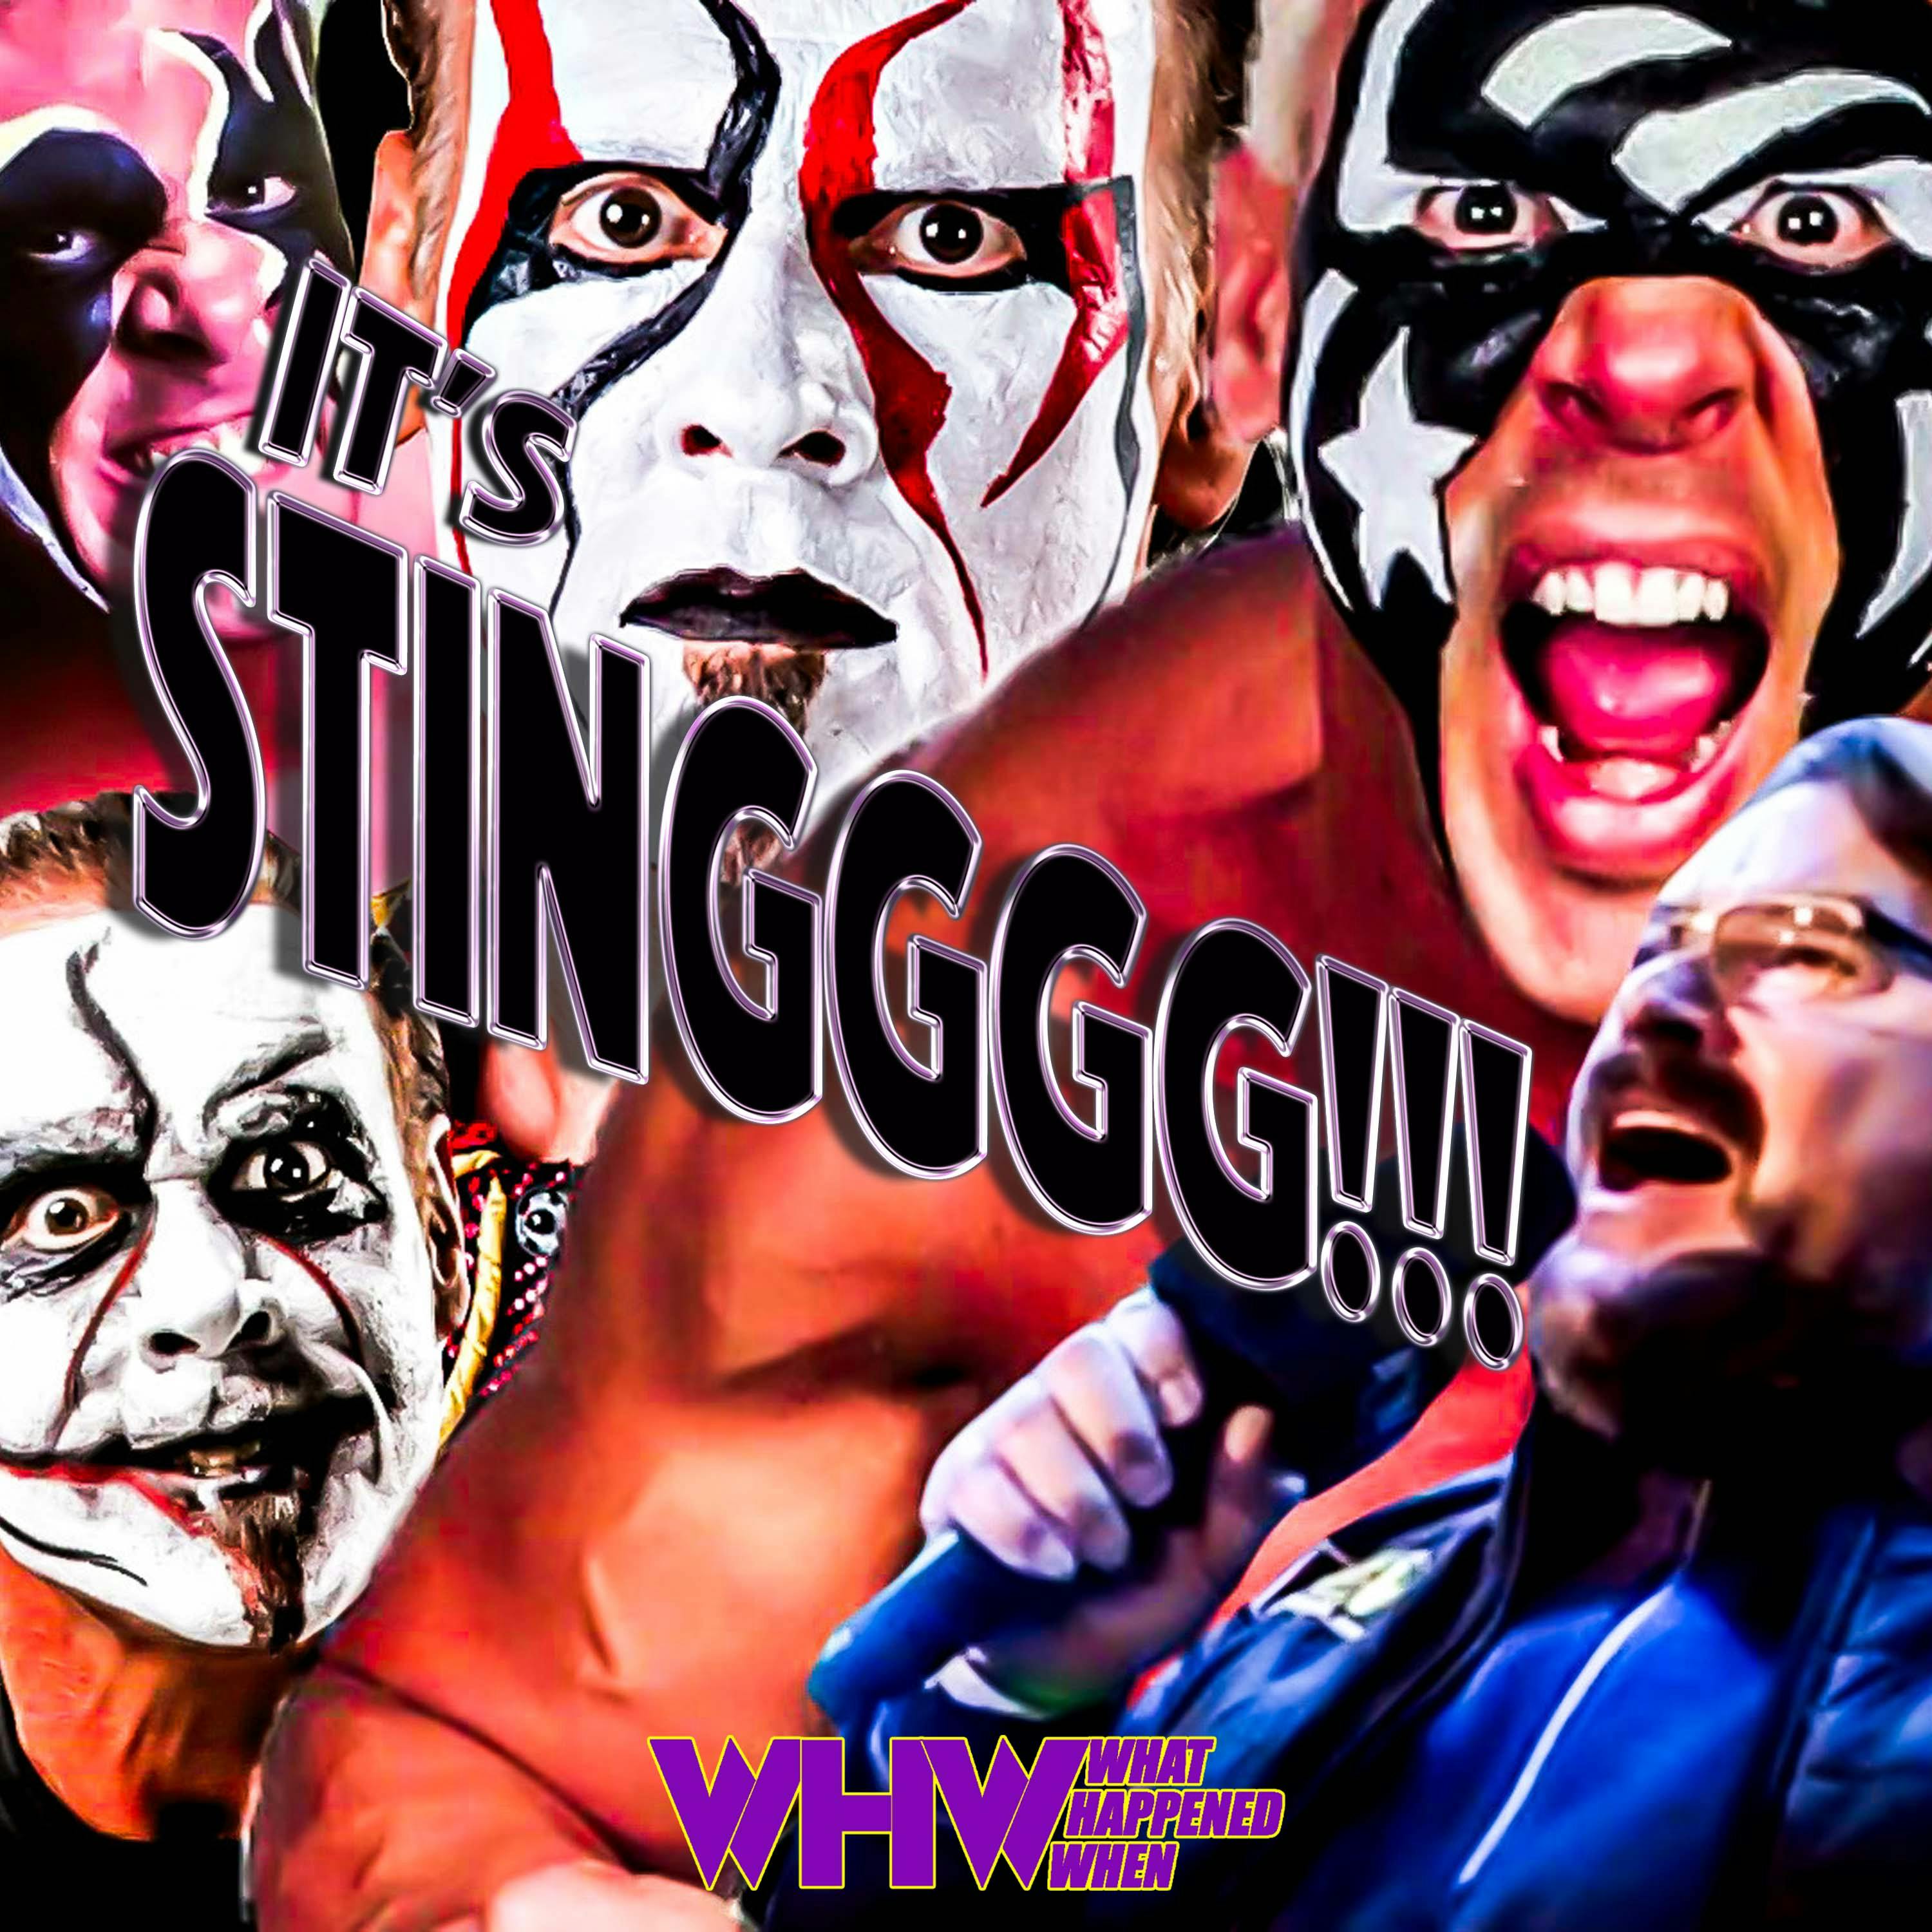 Episode 373: It's STING!